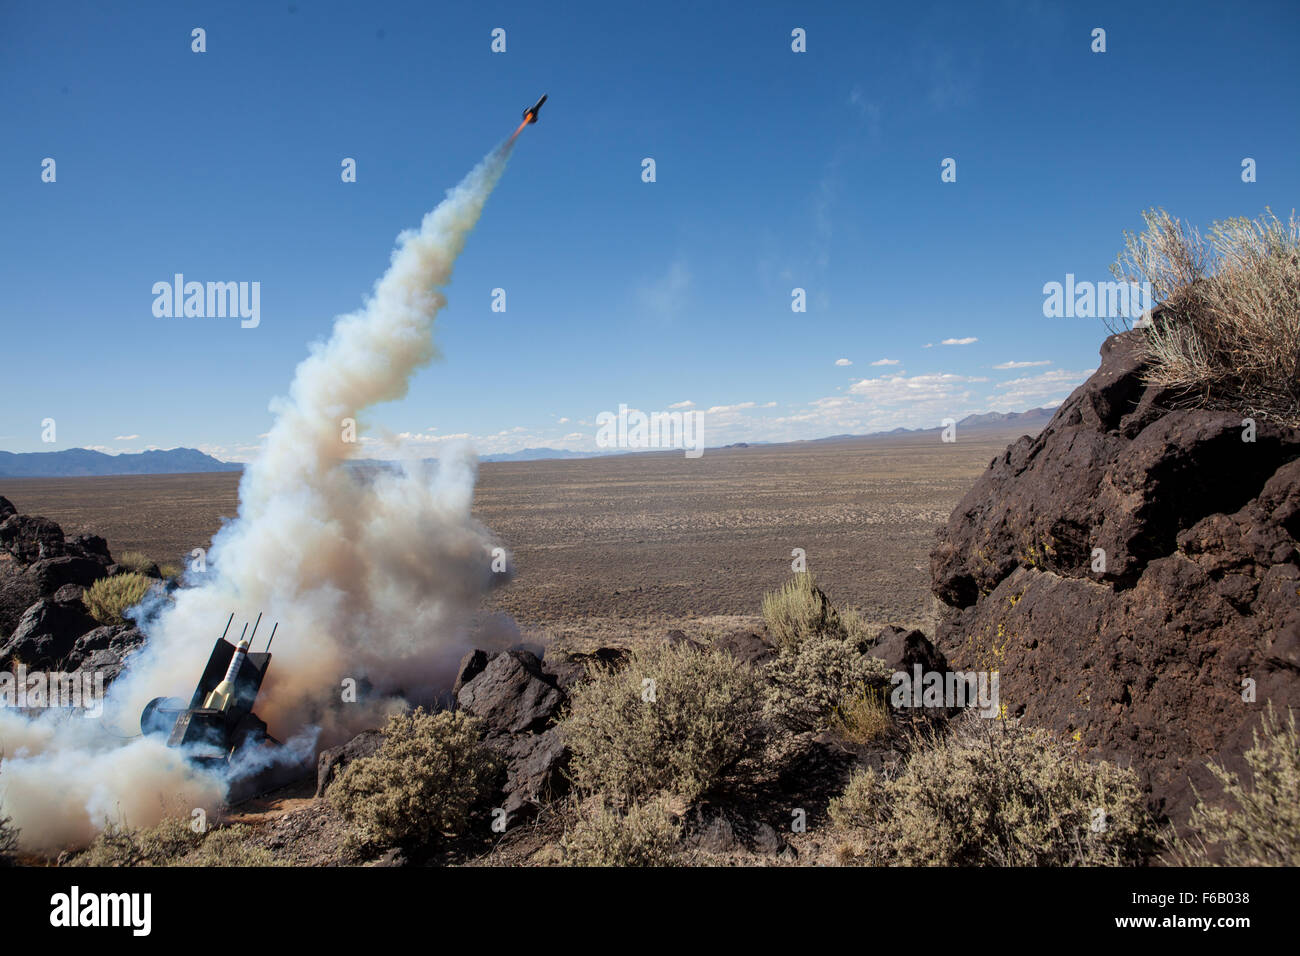 U.S. Marines assigned to 2d Low Altitude Air Defense Battalion fire simulated surface to air missiles in support of Red Flag at Tonopah Test Range, Nev., July 23, 2015. Red Flag is an advanced aerial combat exercise to train U.S., NATO and other allied countries for air combat situations. (U.S. Marine Corps photo by Cpl. Derek L. Picklesimer/Released) Stock Photo